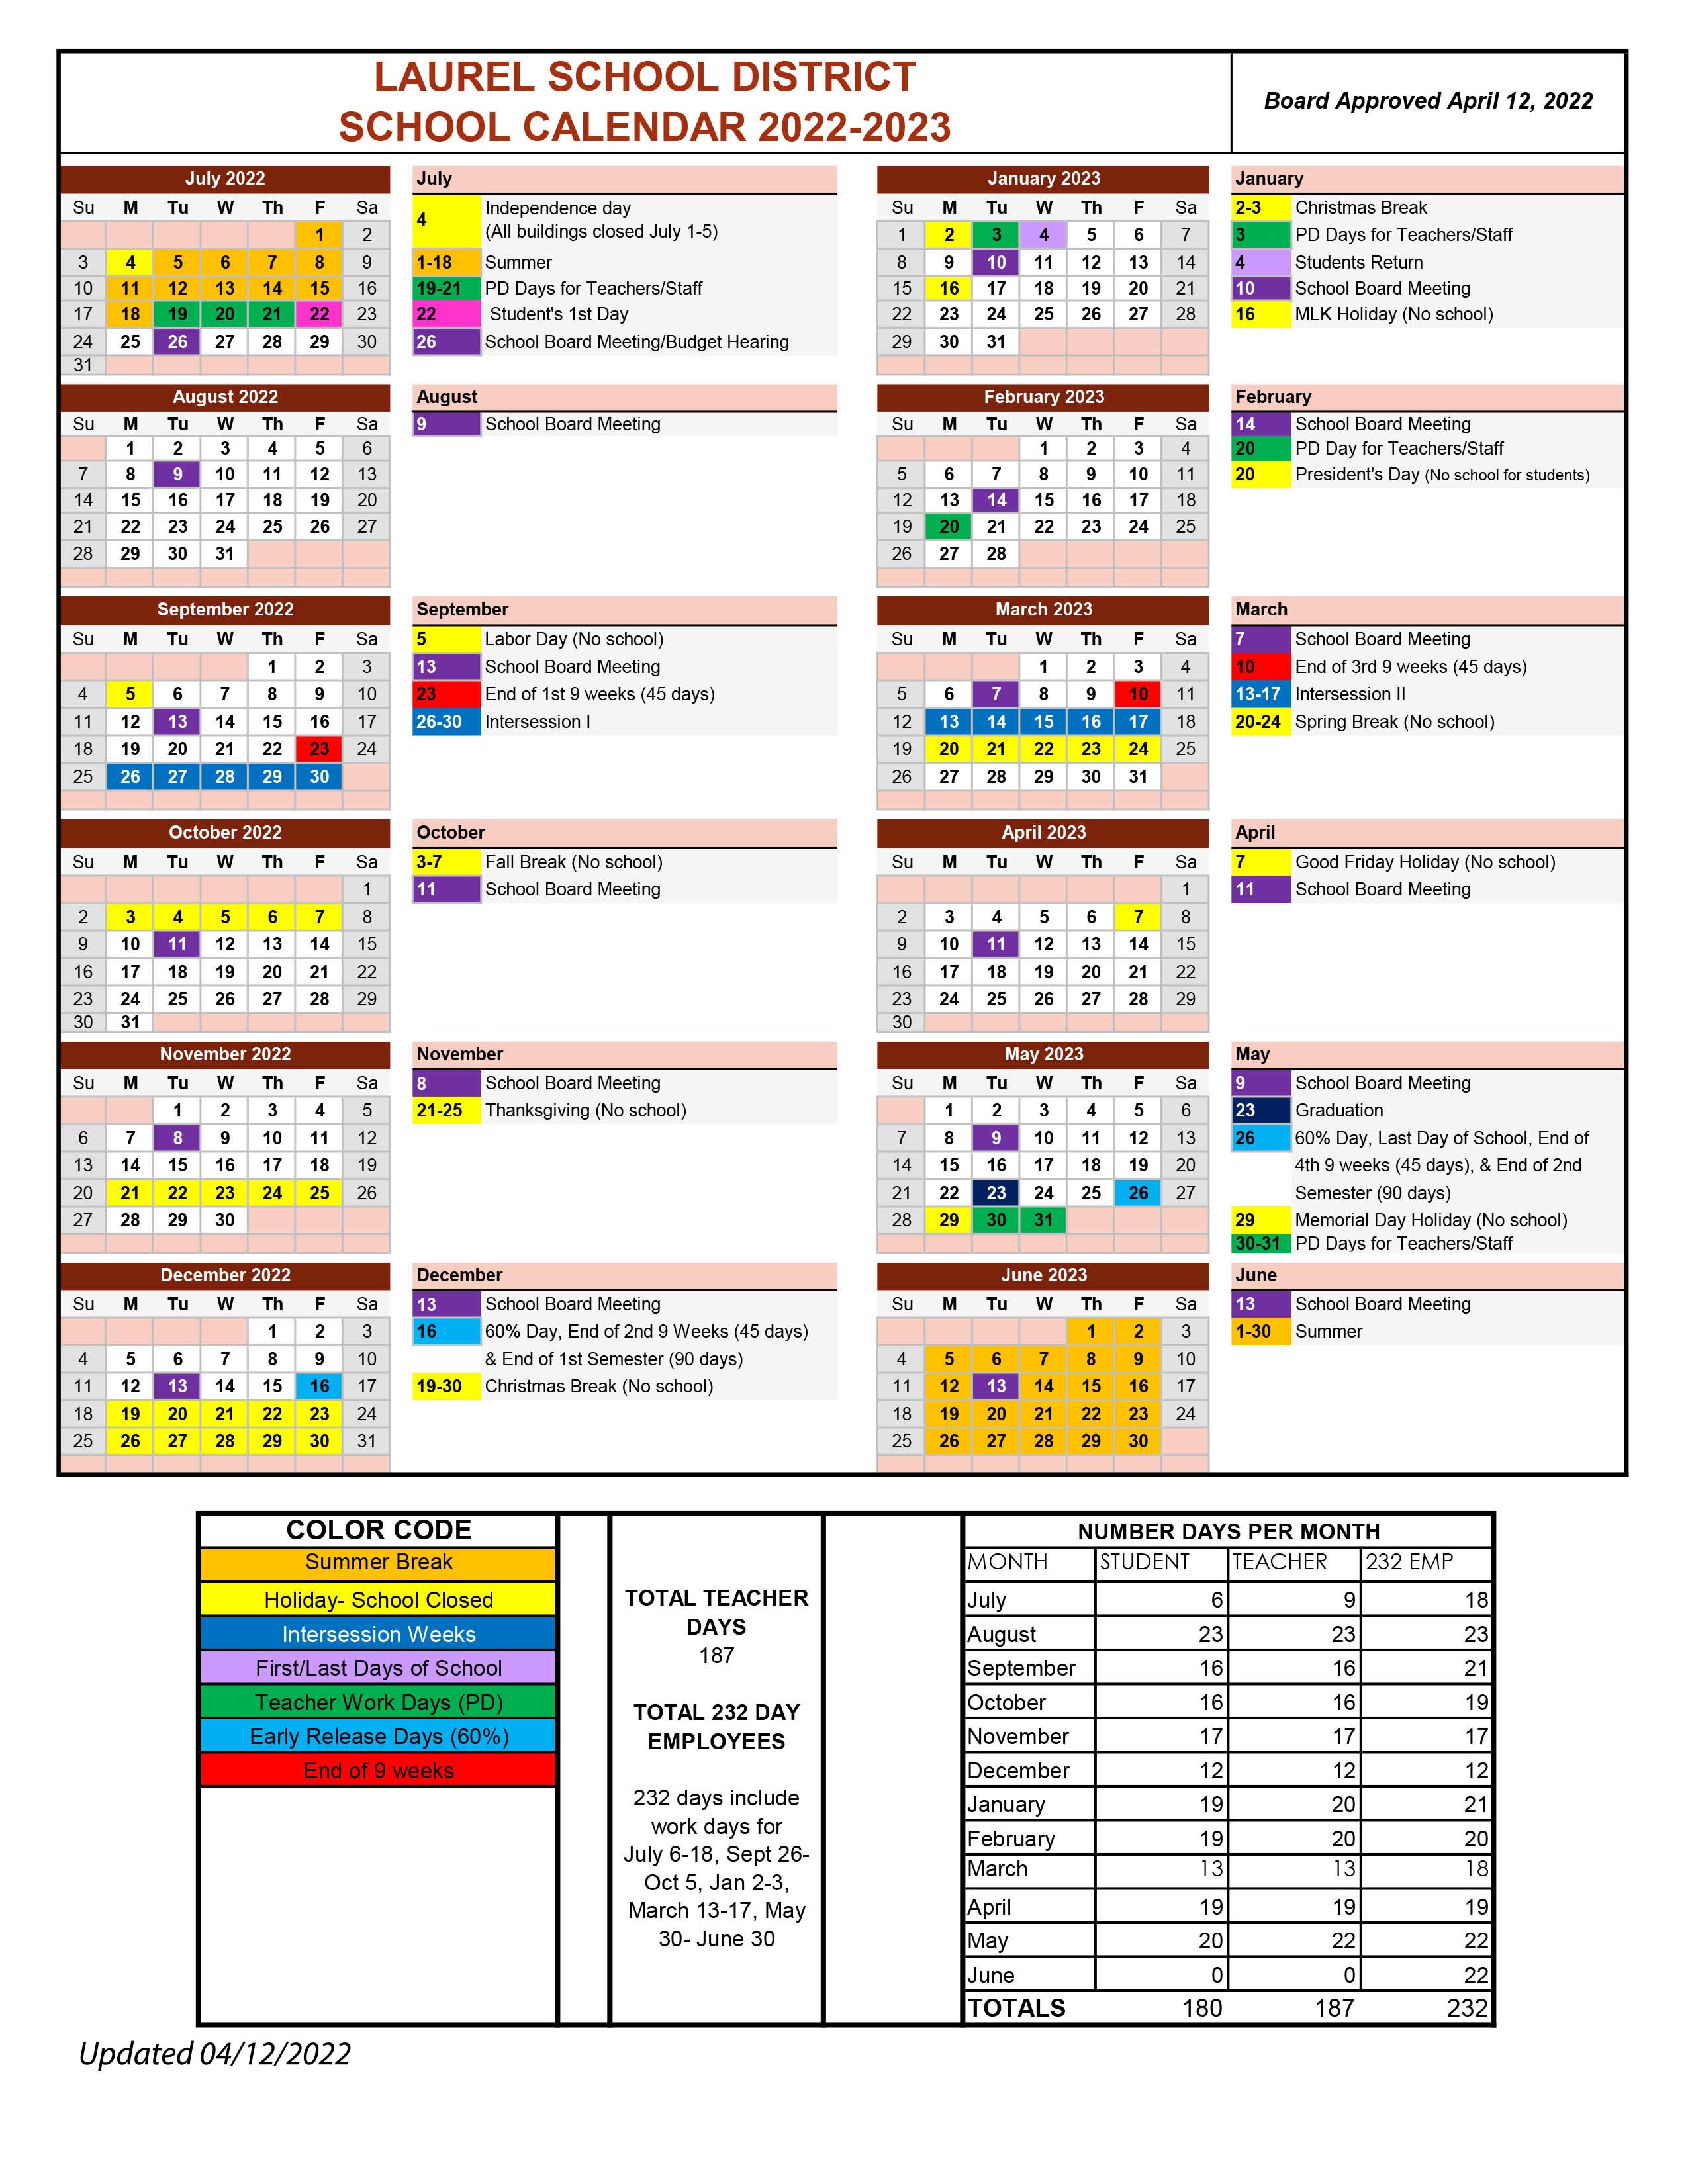 chesterfield-county-school-district-calendar-2022-and-2023-publicholidays